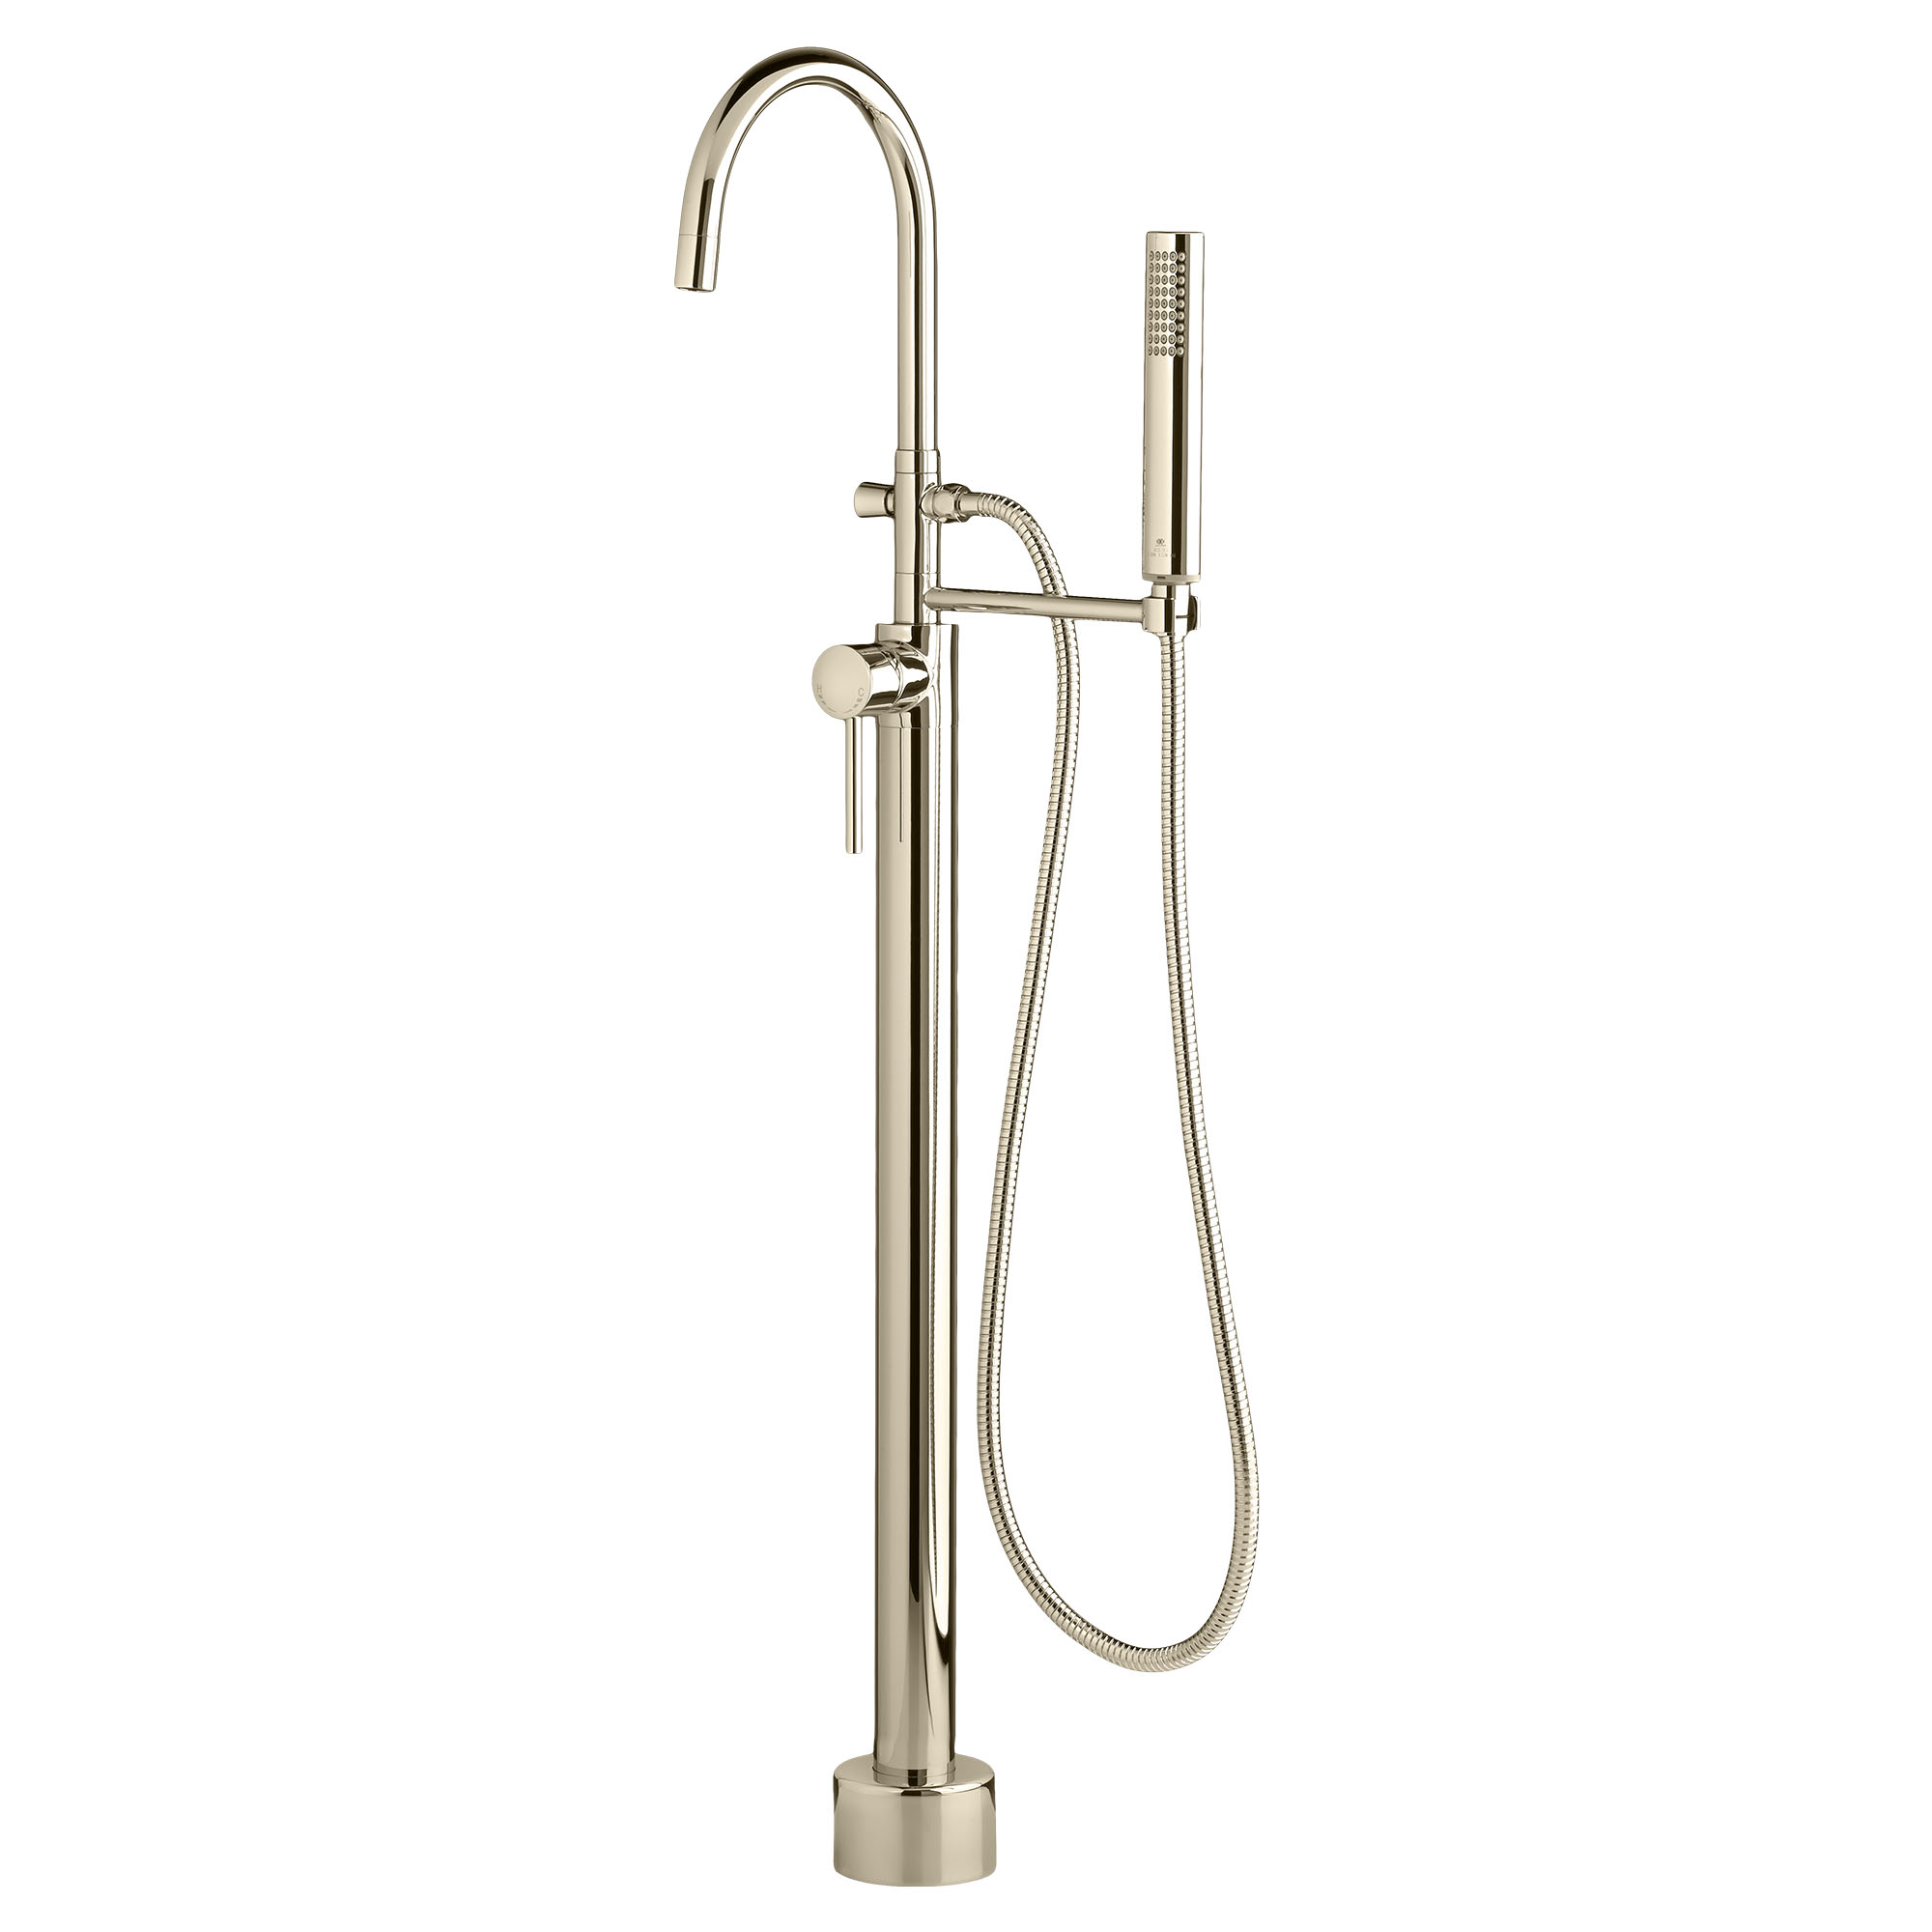 Equility Round Floor Mount Bathtub Filler with Hand Shower and Lever Handle